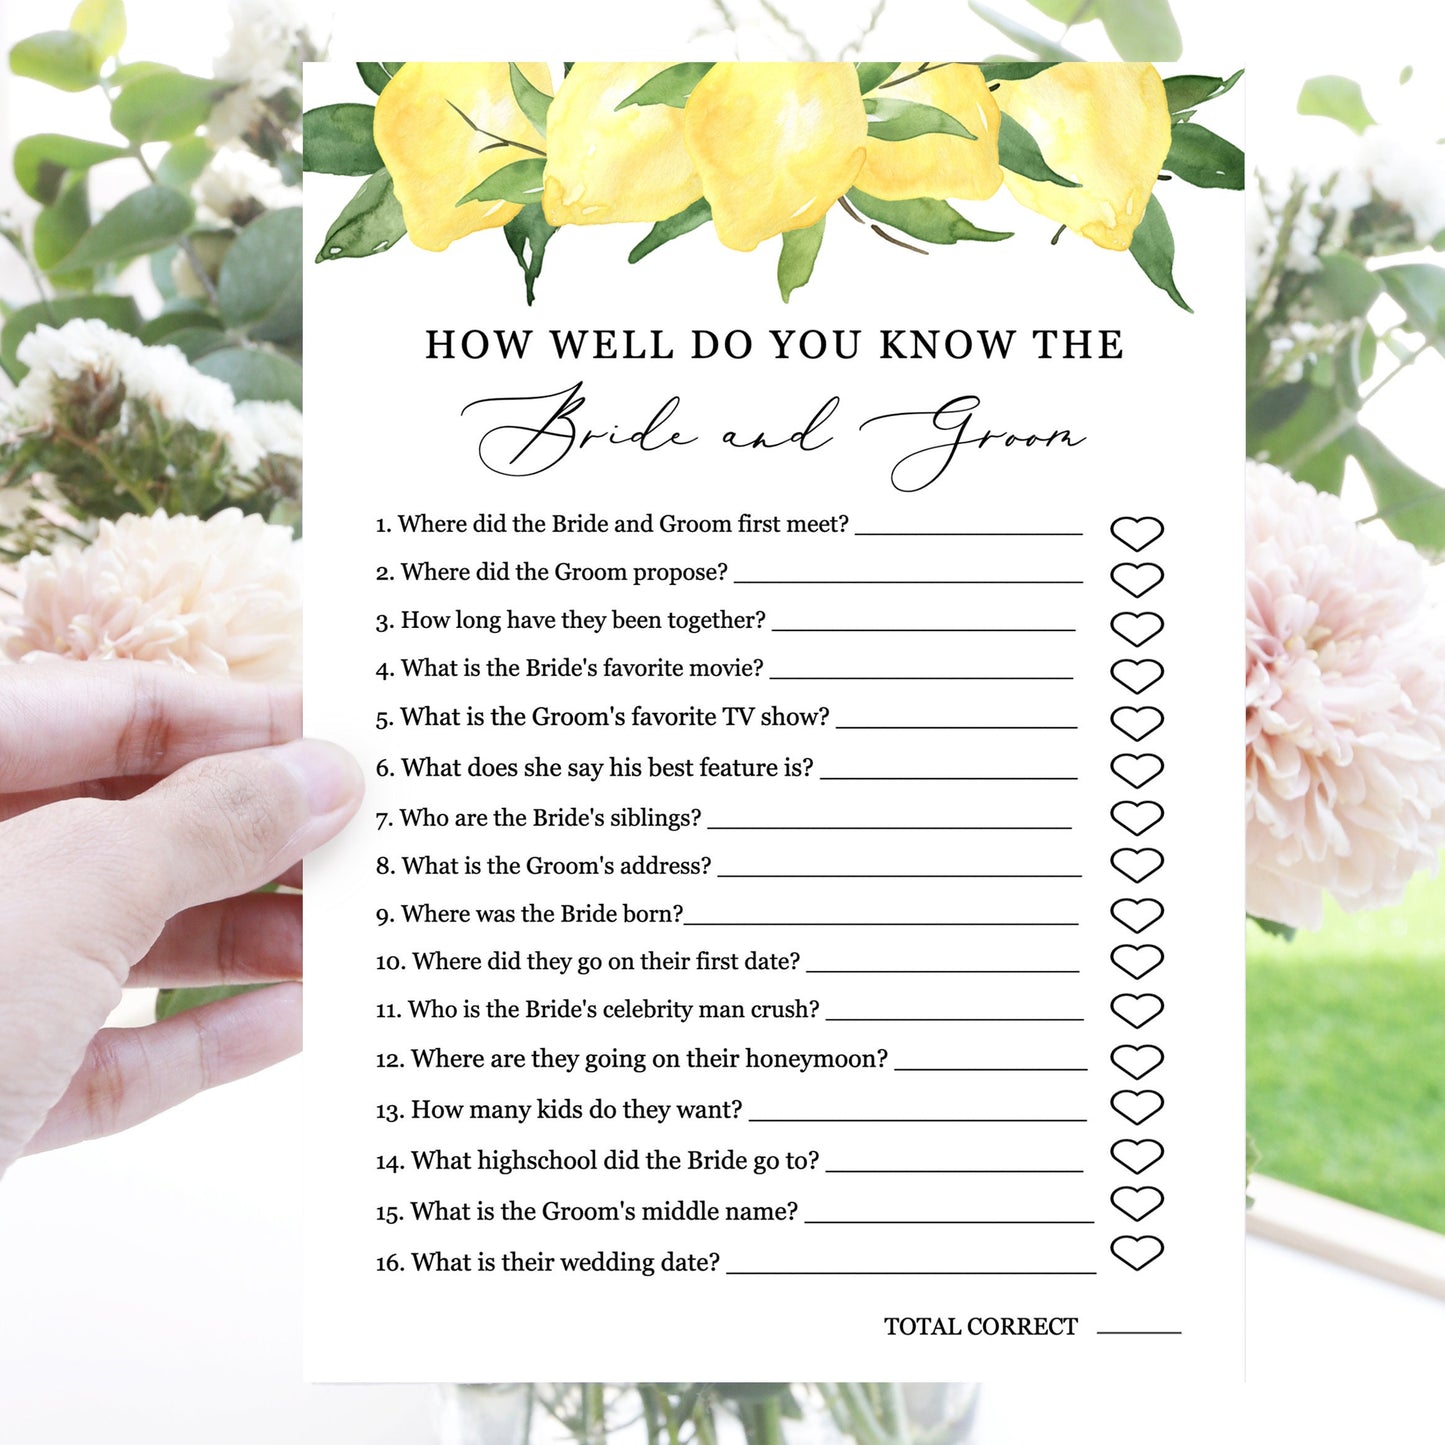 Editable How Well Do You Know the Bride and Groom Bridal Shower Games Lemon Citrus Template